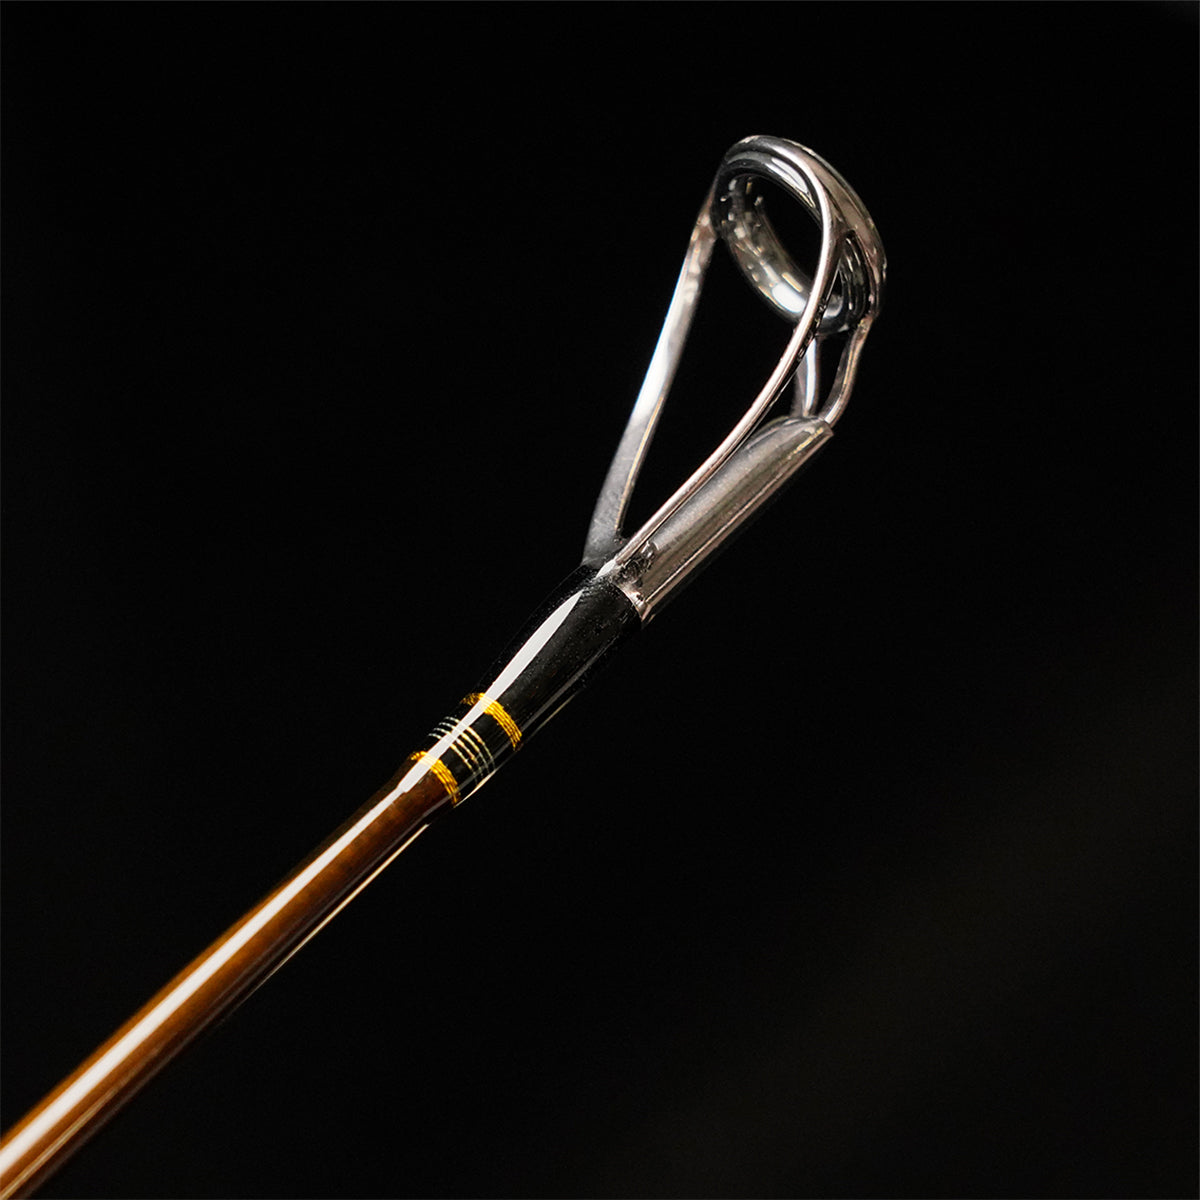 Cow Special 75 II Popping Rod